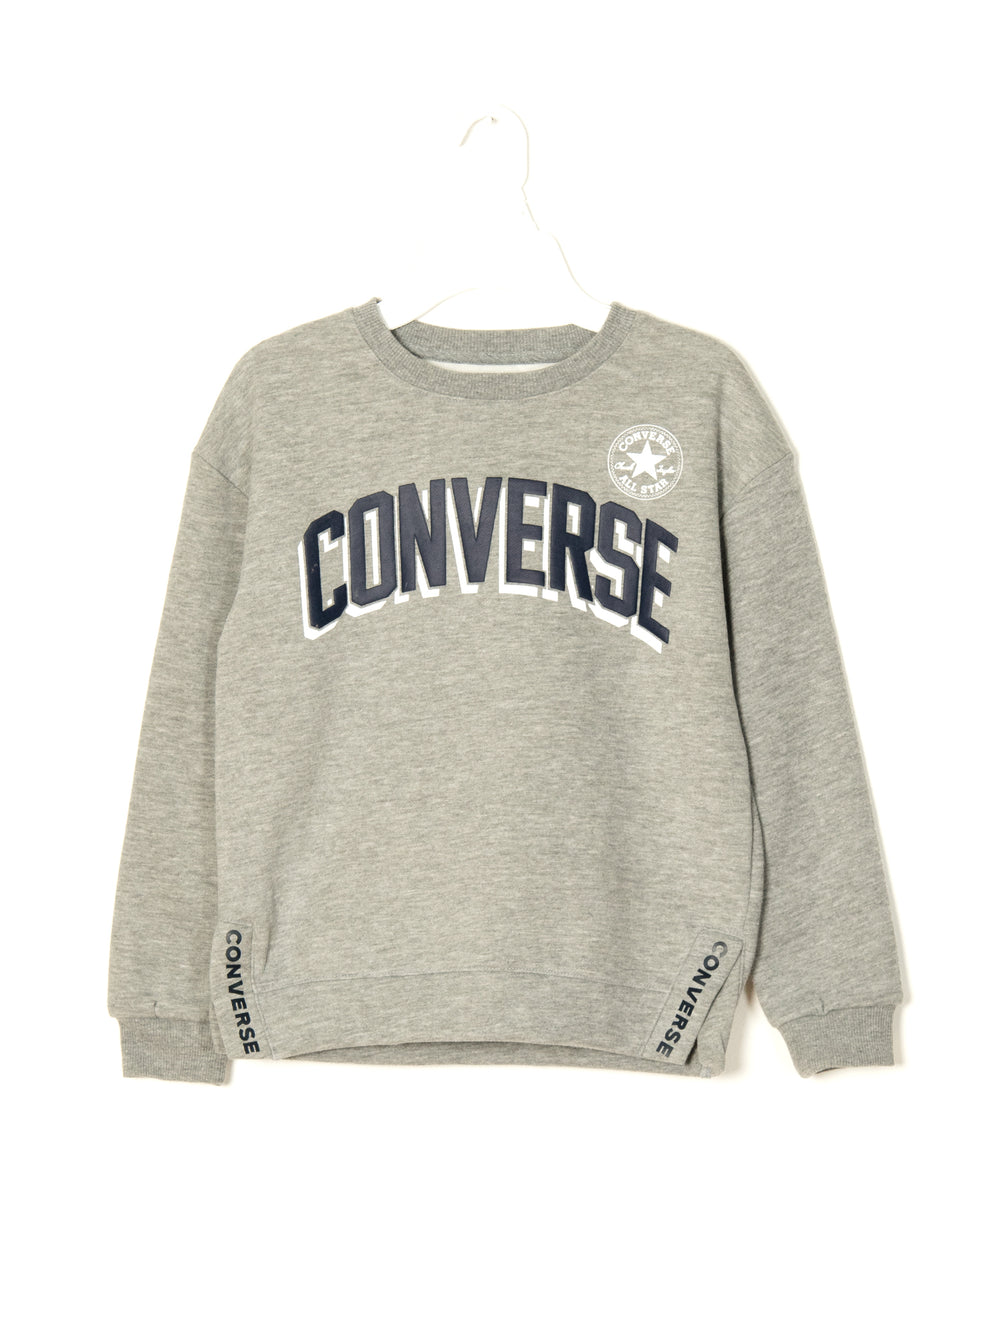 CONVERSE YOUTH BOYS LOGO CREW - CLEARANCE